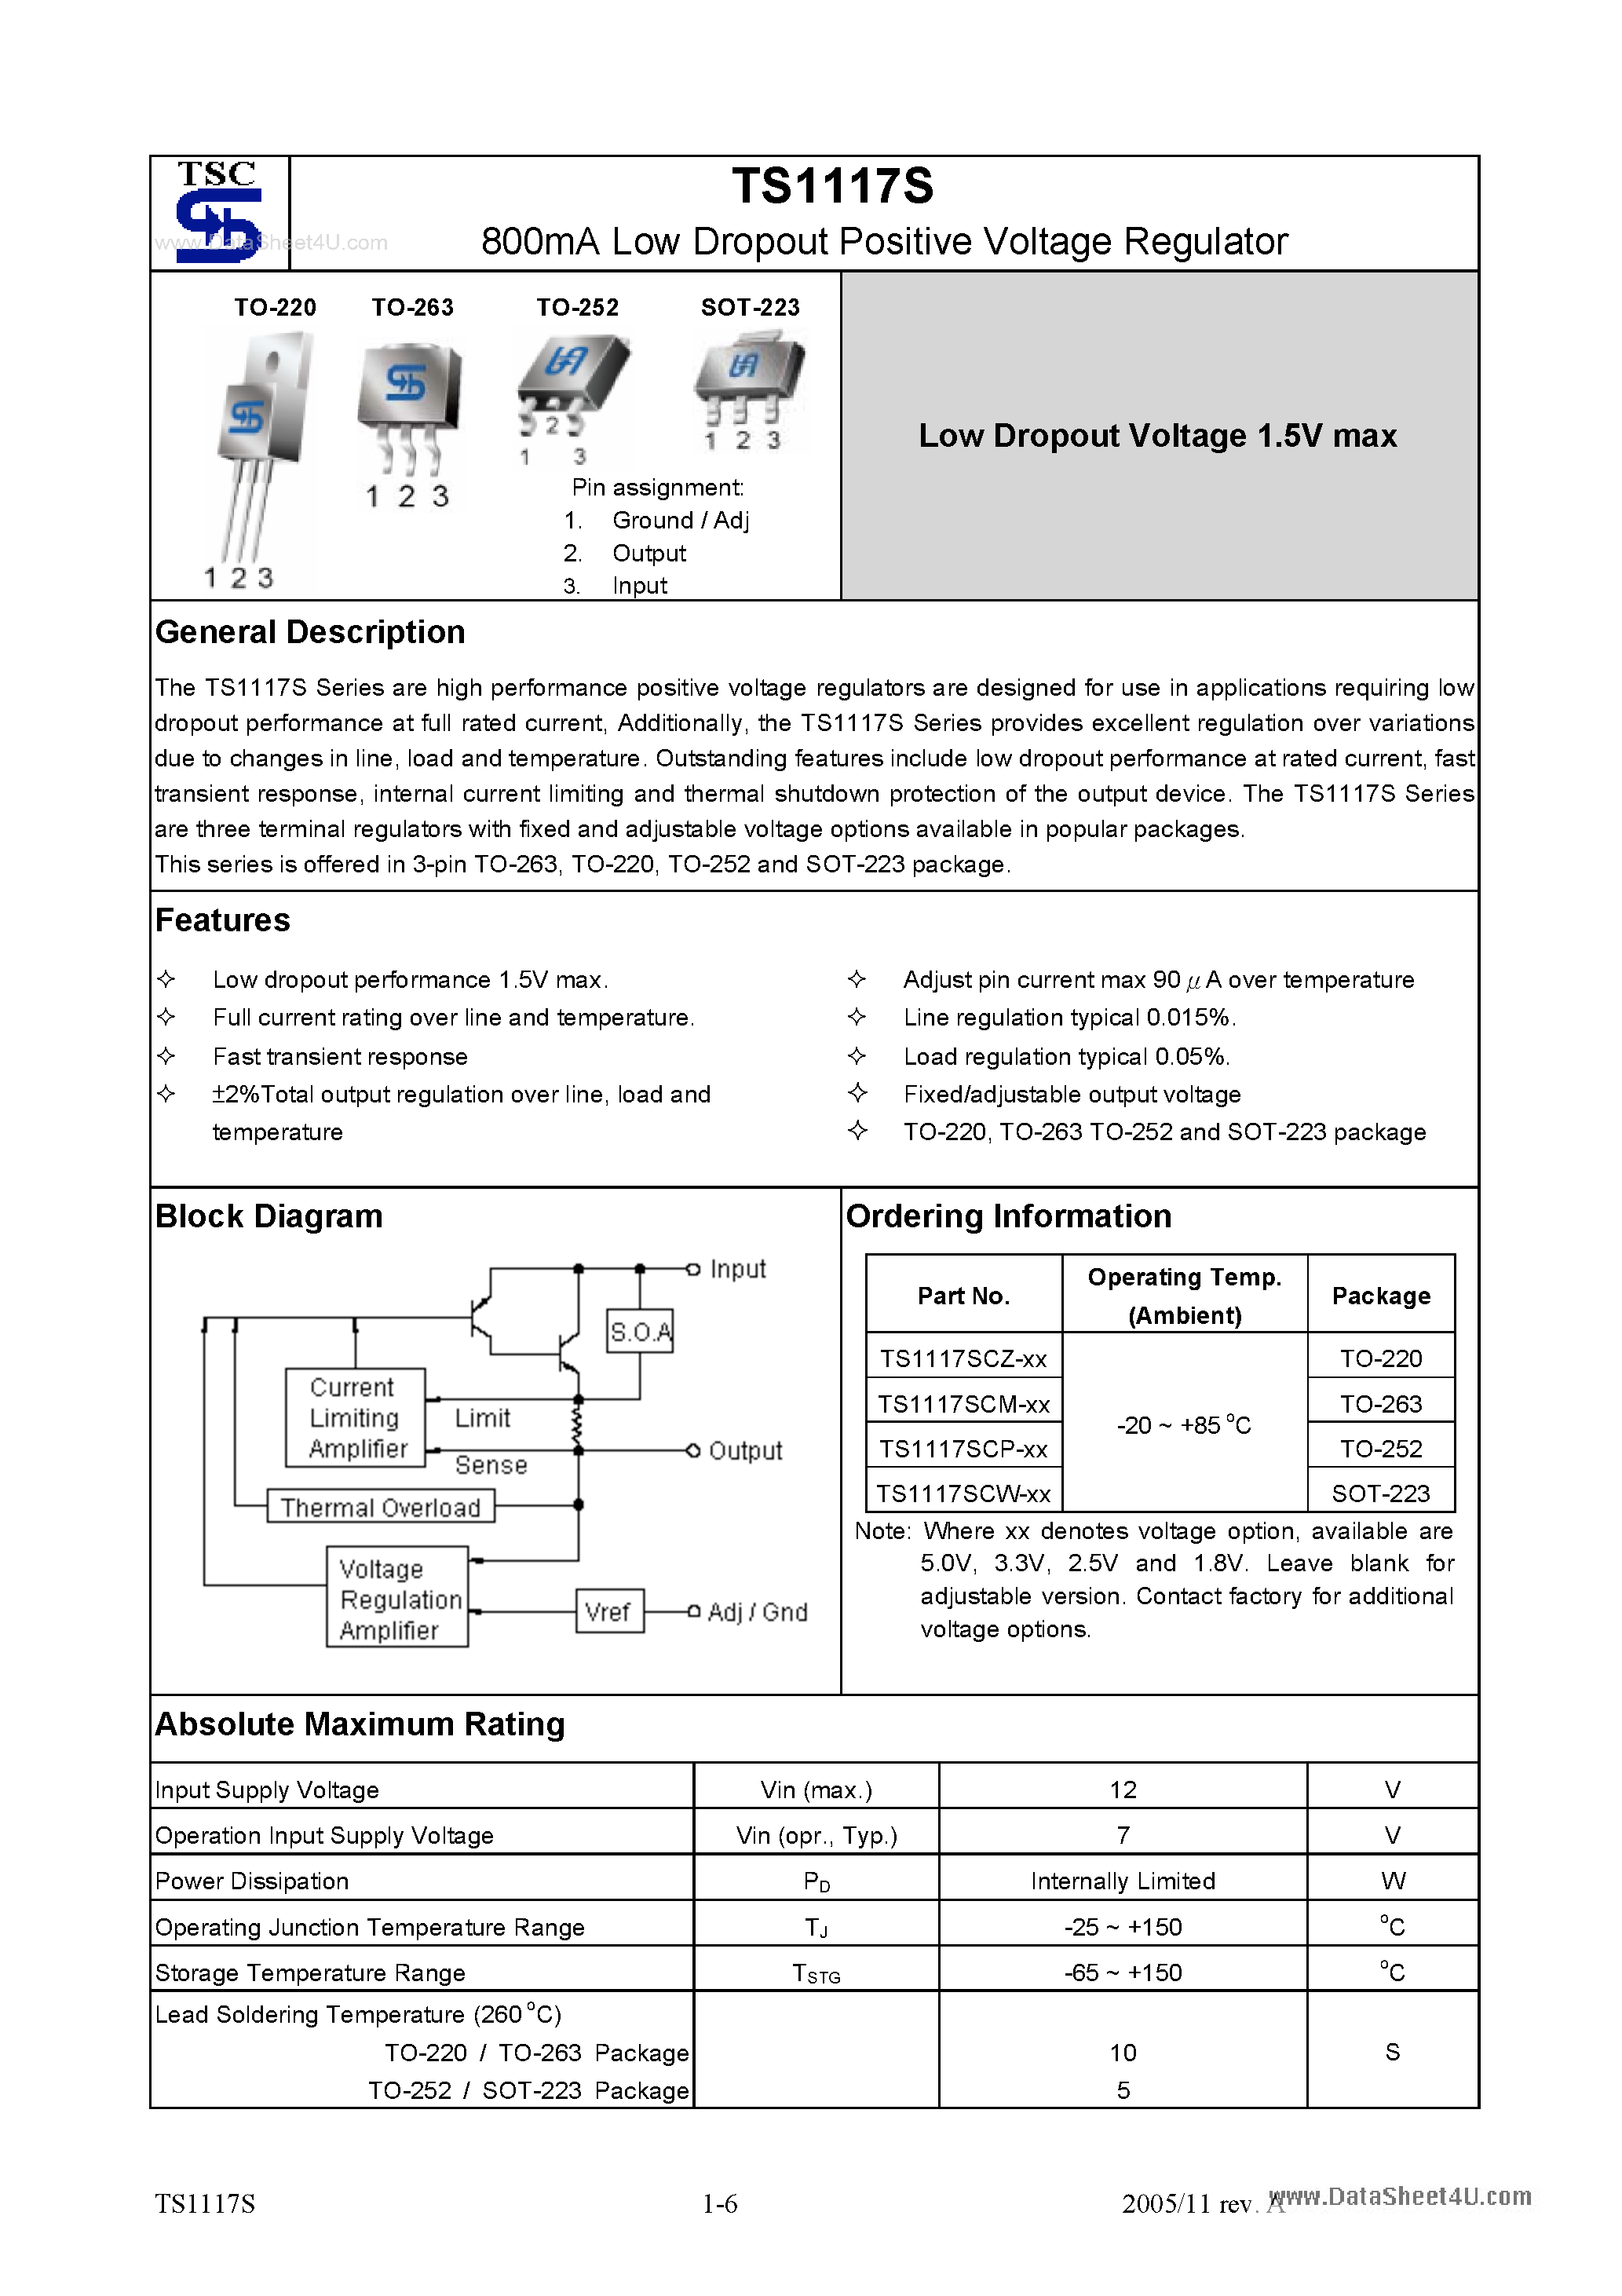 Datasheet TS1117S - 800mA Low Dropout Positive Voltage Regulator page 1